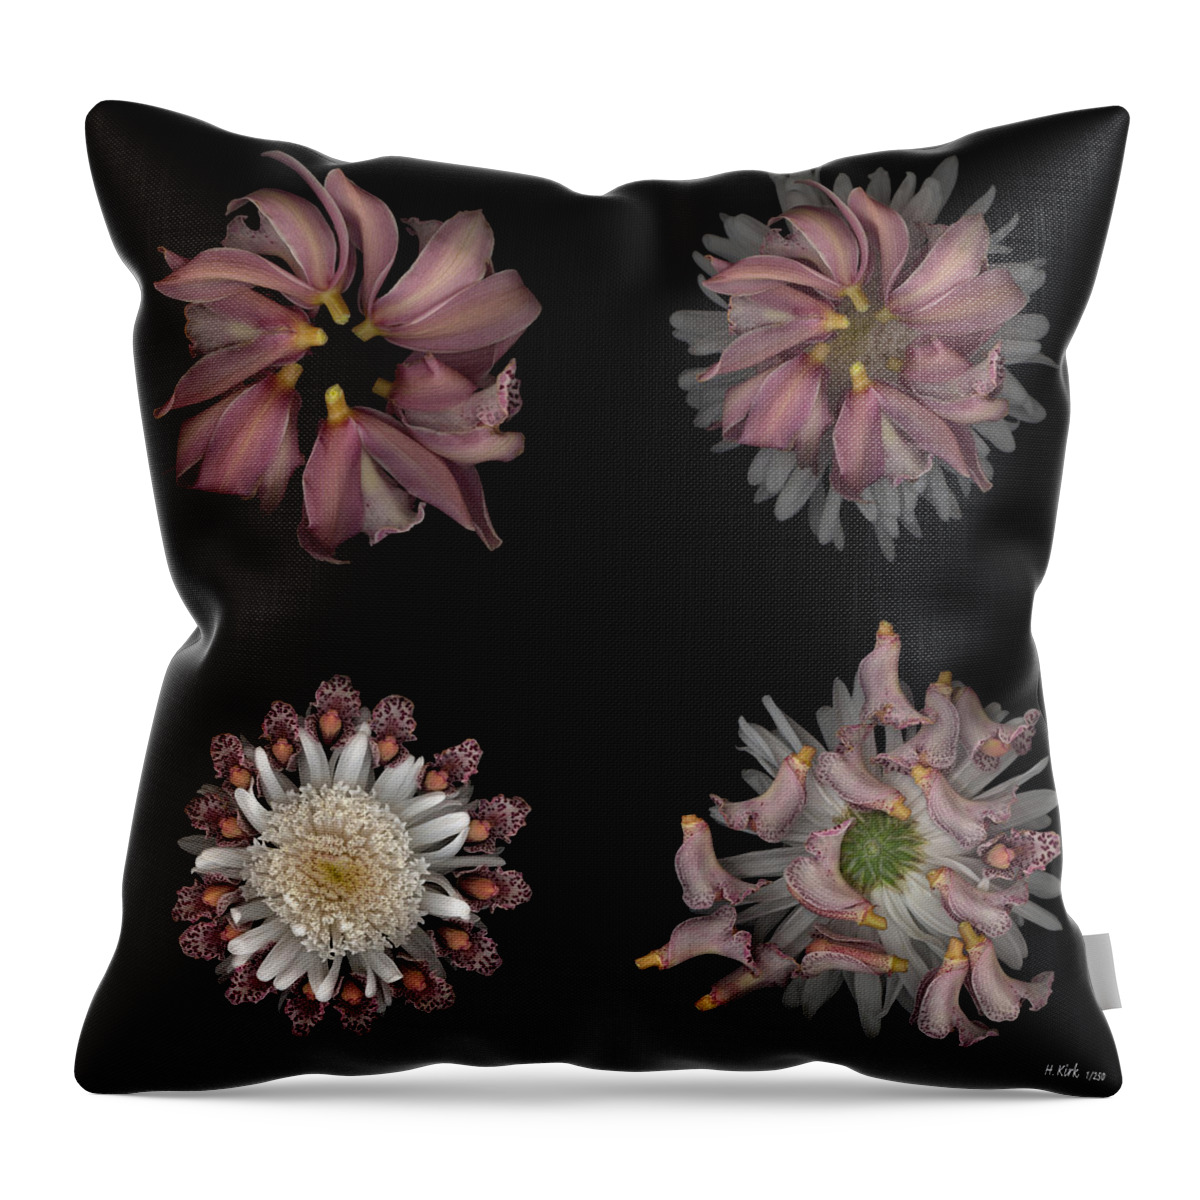  Throw Pillow featuring the photograph Kaleidoscope Block Two by Heather Kirk